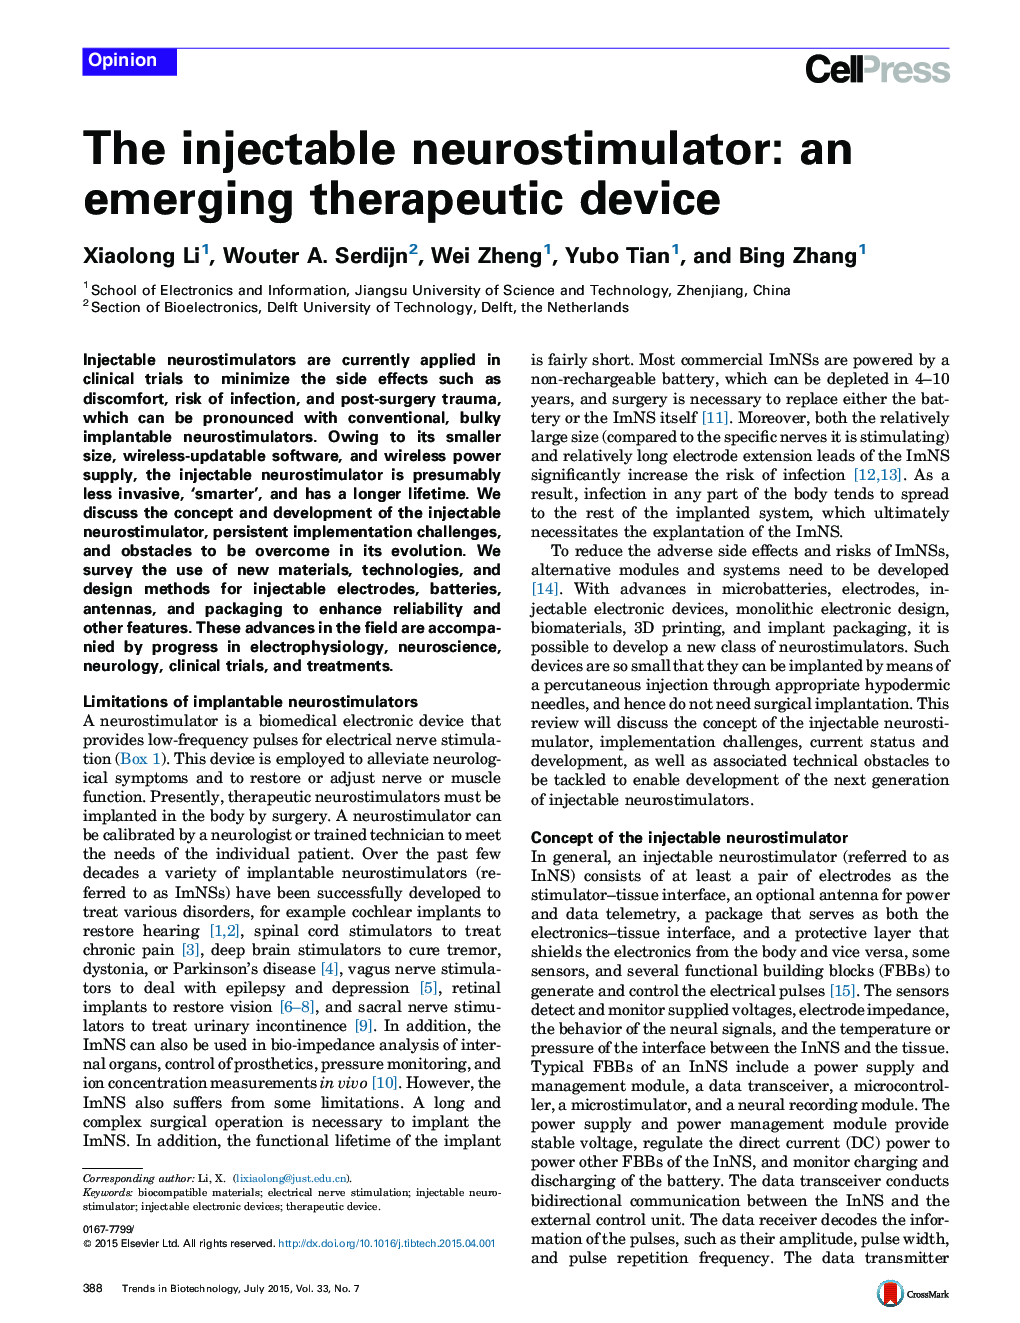 The injectable neurostimulator: an emerging therapeutic device